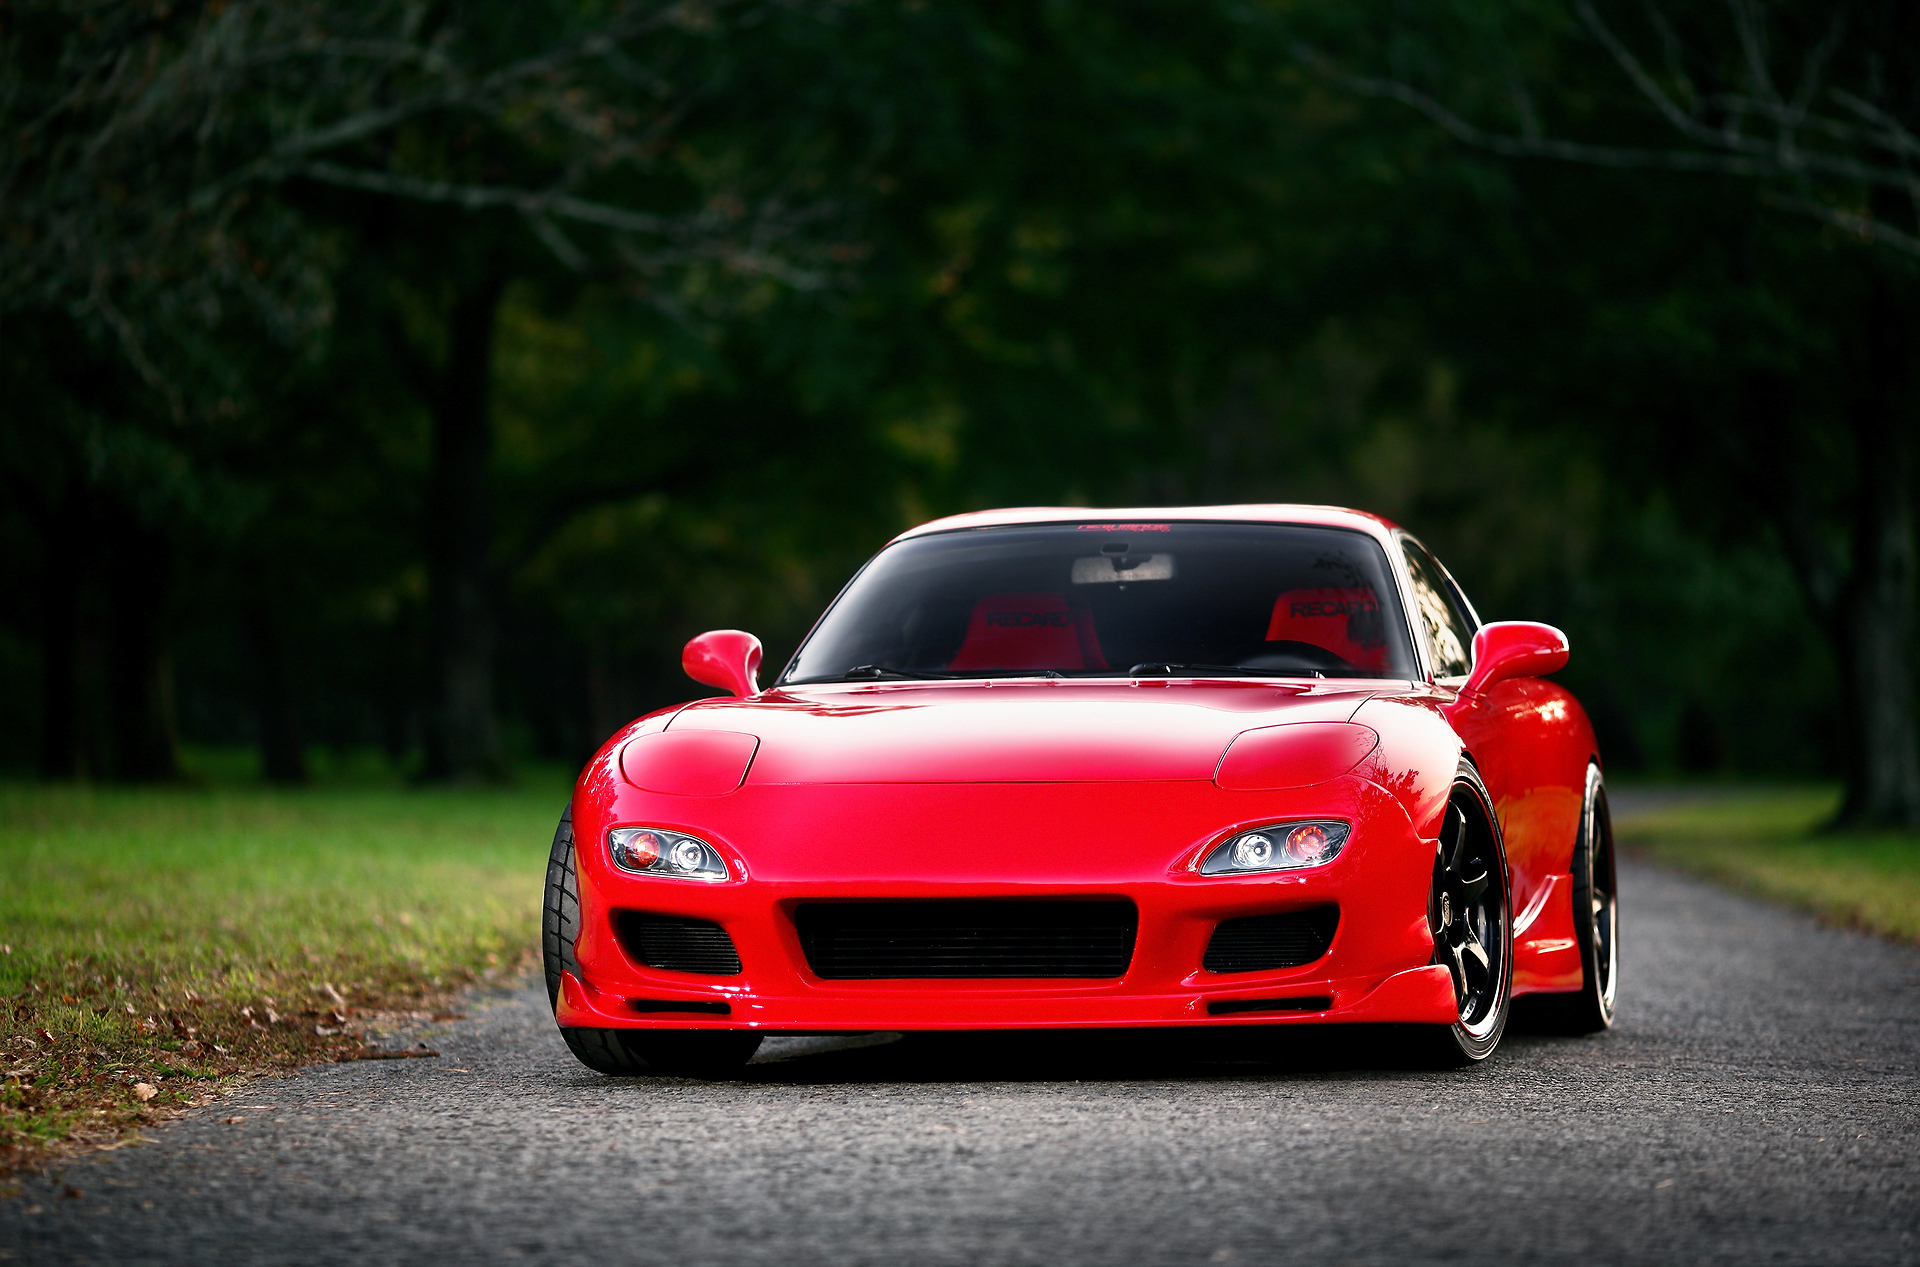 33 Mazda RX-7 HD Wallpapers | Backgrounds - Wallpaper Abyss